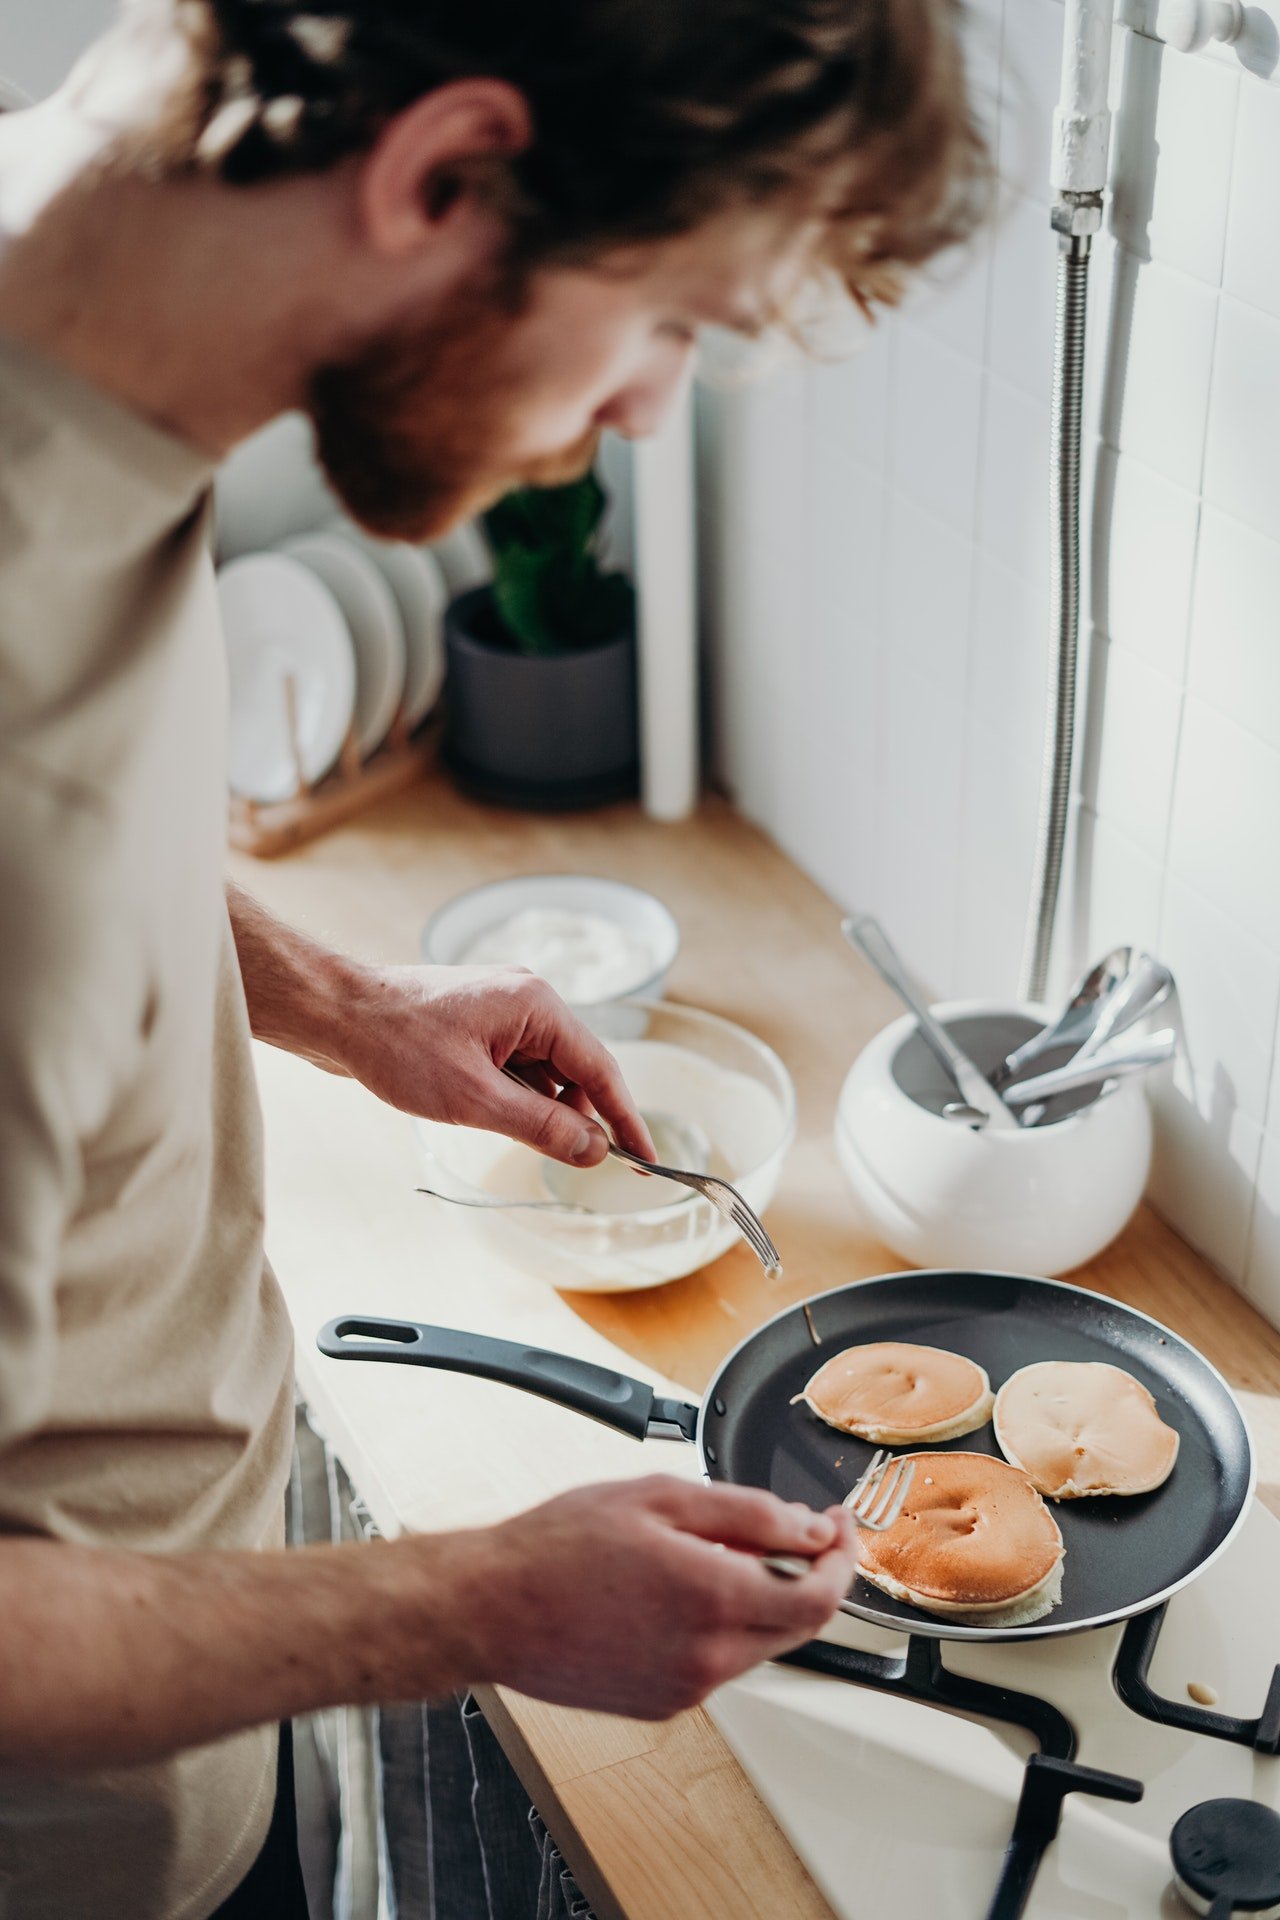 Susy brought him some pancake mix so he could make breakfast for his children. | Source: Pexels